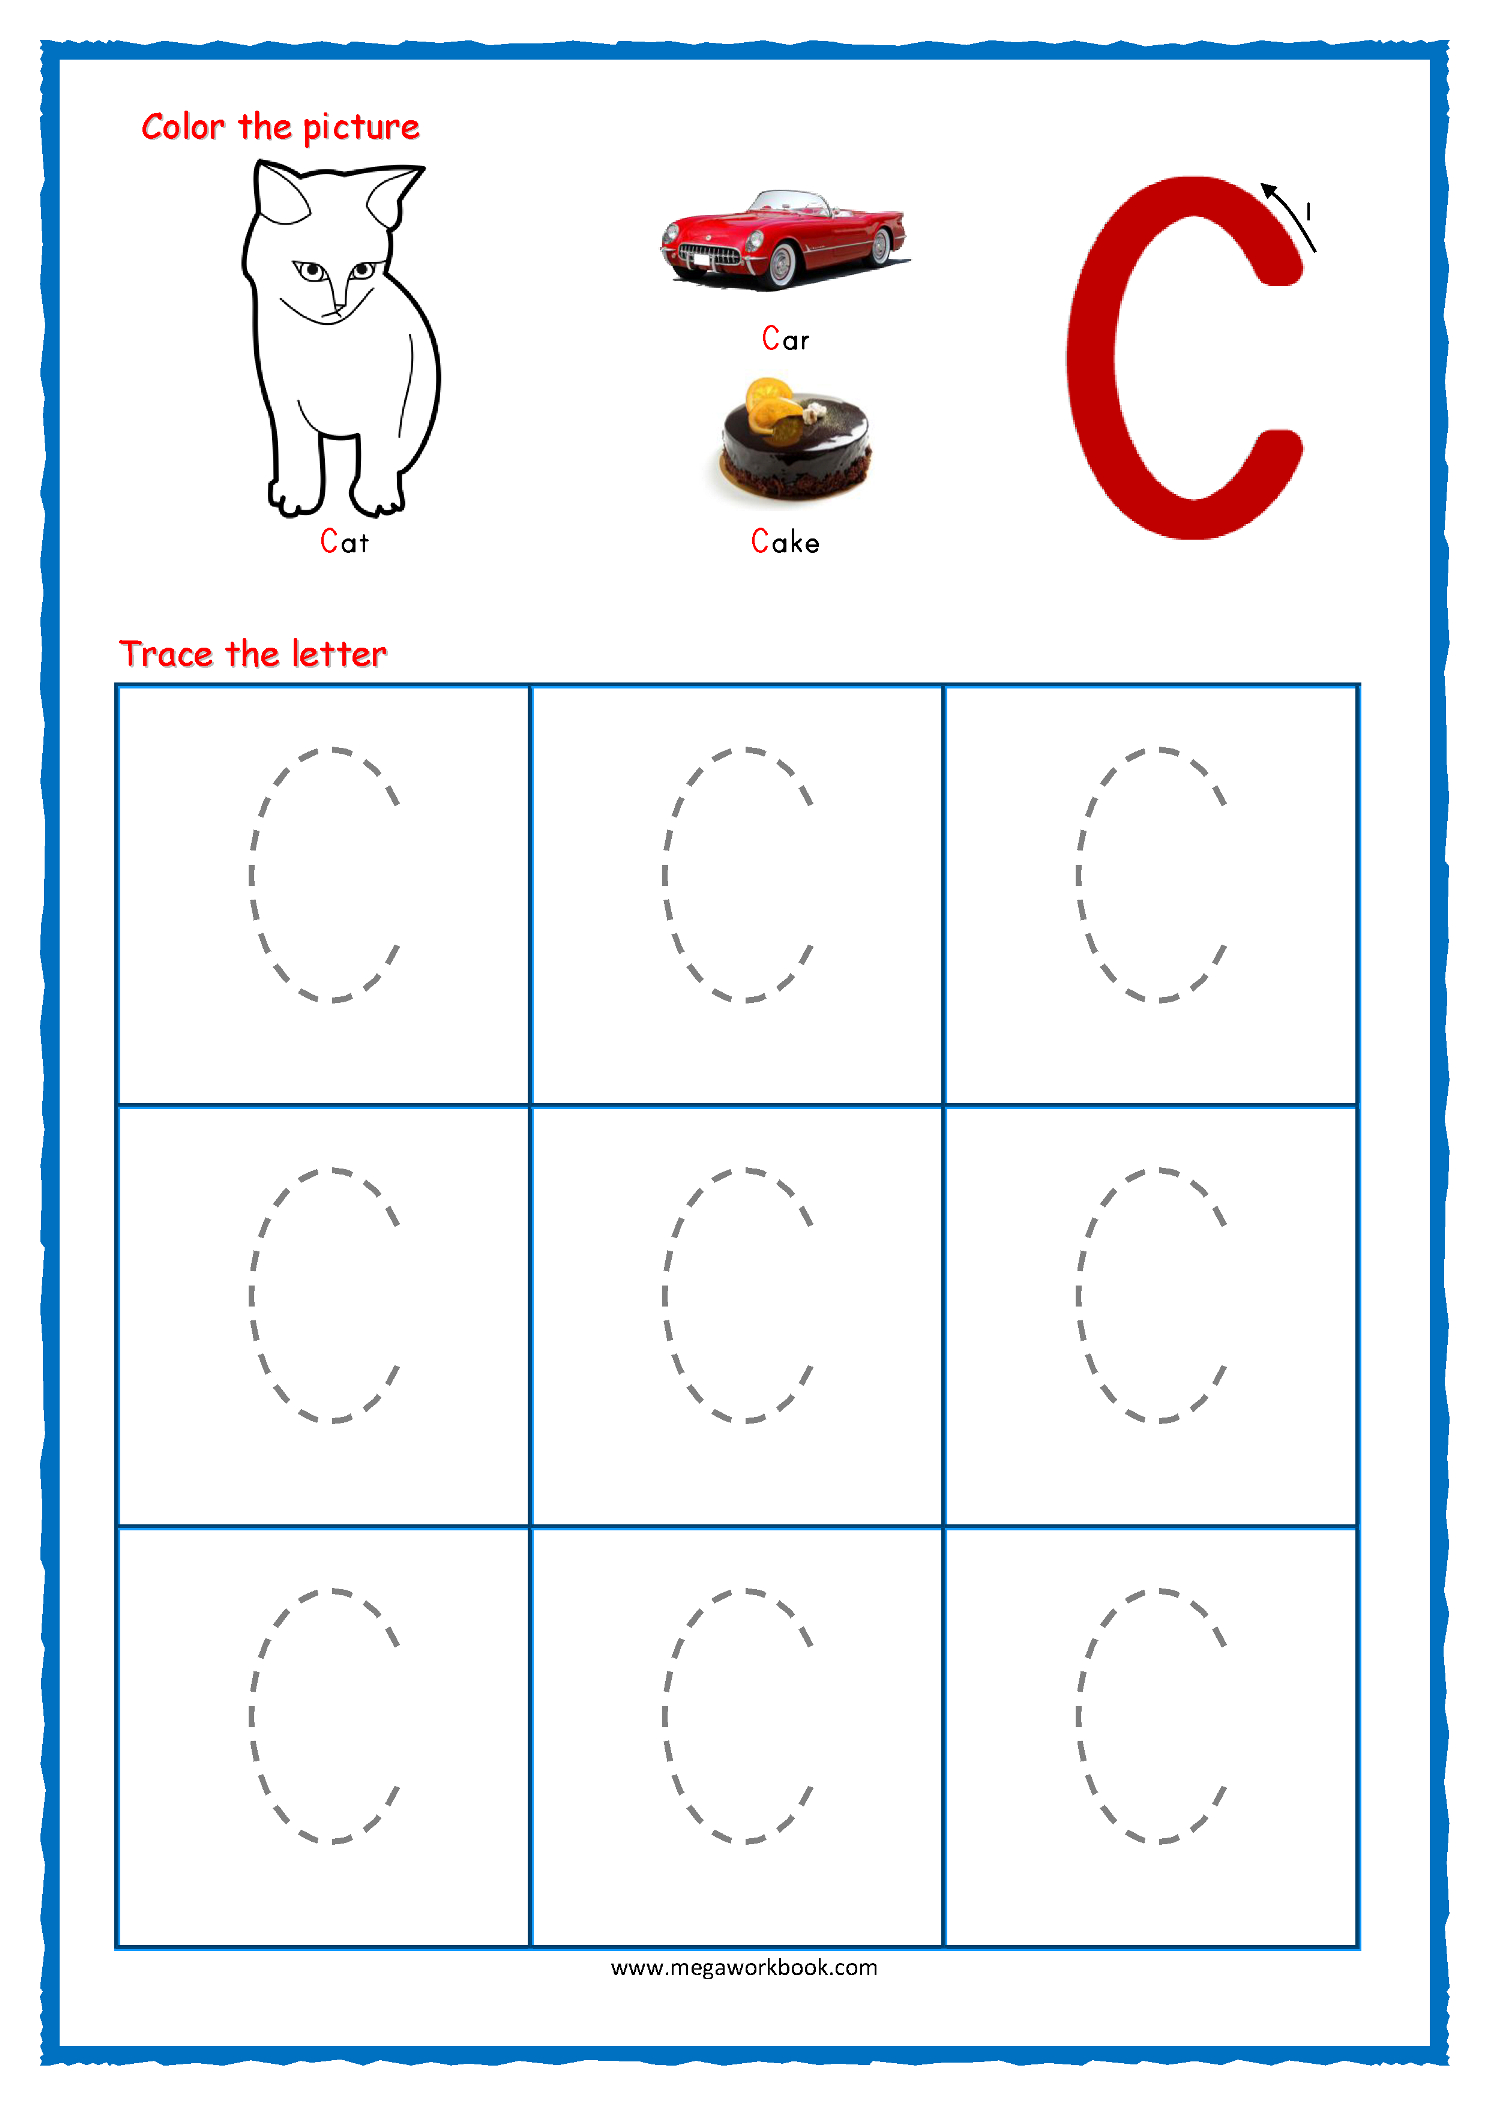 Tracing Letters - Alphabet Tracing - Capital Letters intended for Letter I Tracing Worksheets For Kindergarten